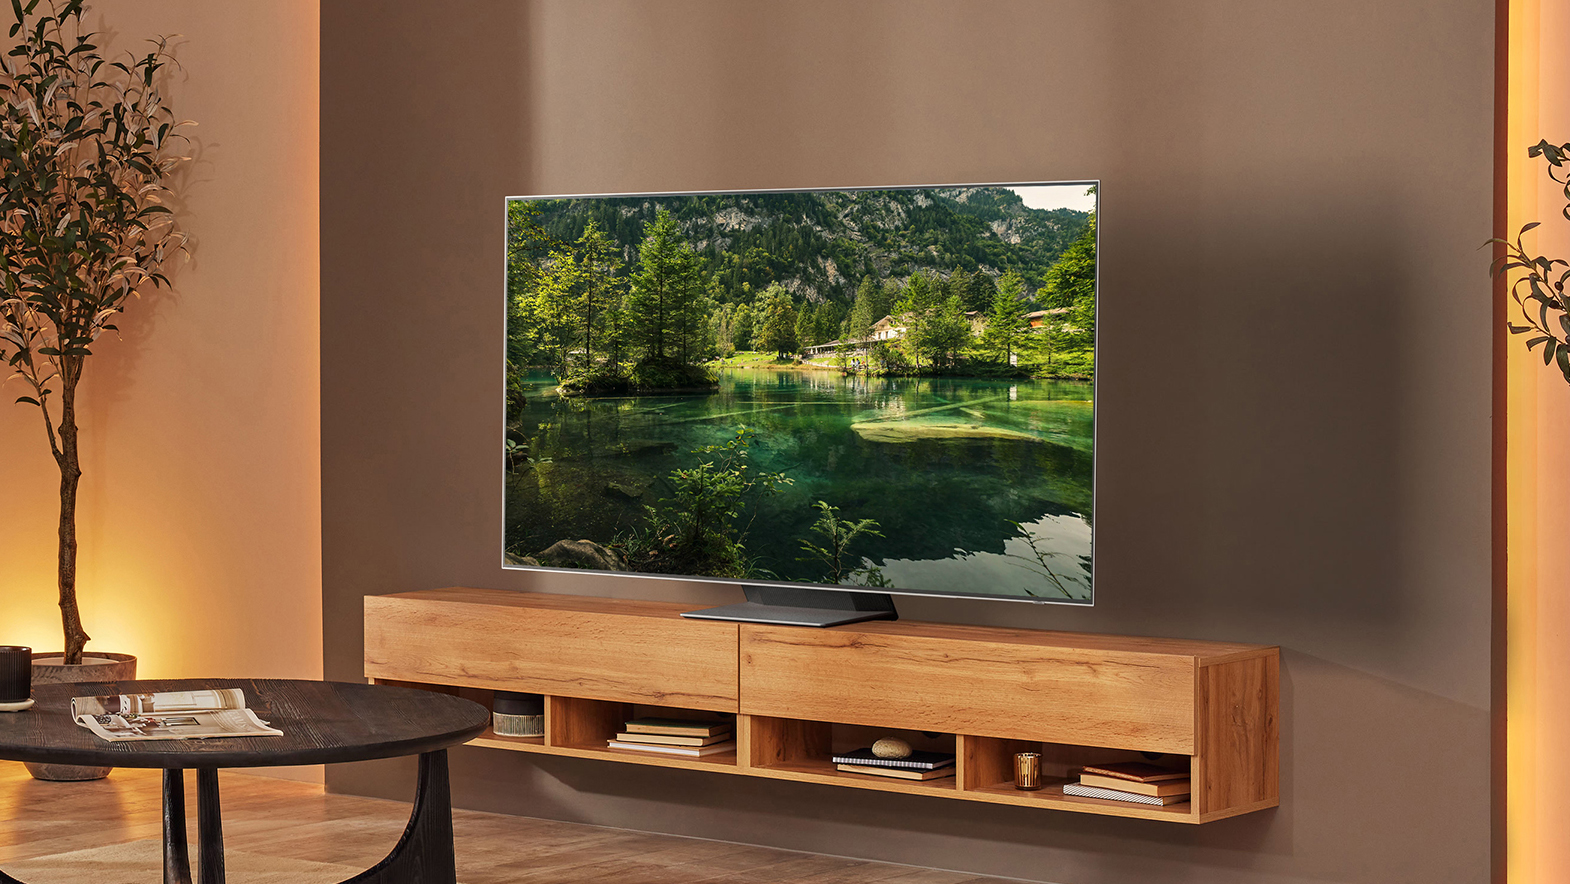 Samsung S95B in wood-furnished living room, showing a green landscape on the TV